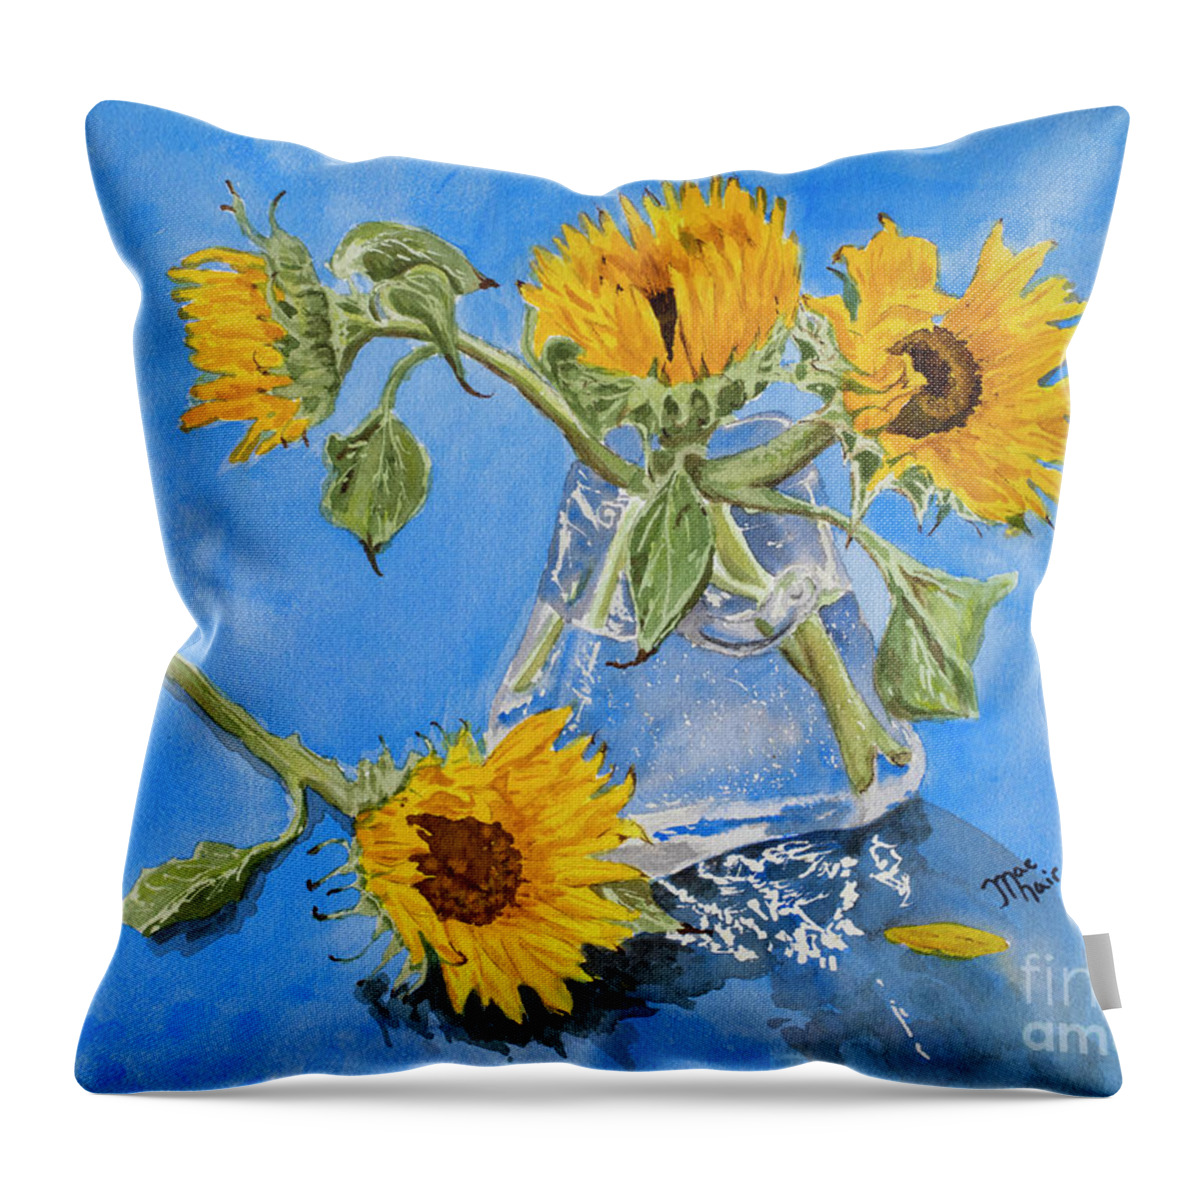 Watercolor Throw Pillow featuring the painting Sunflowers by Jackie MacNair